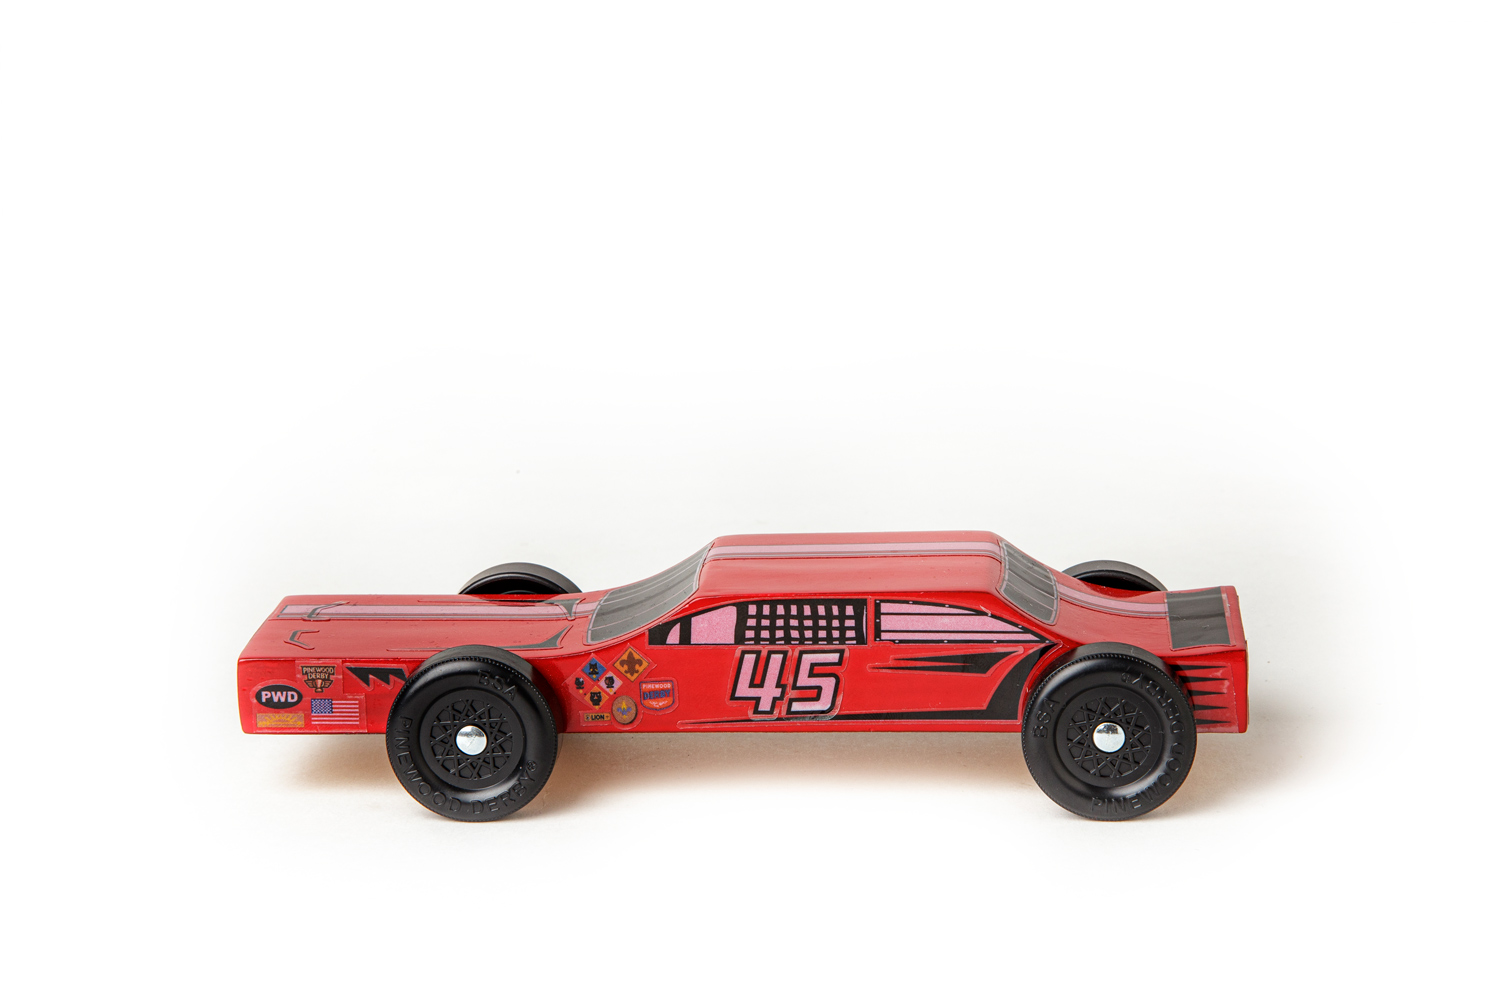 Official Pinewood Derby Car Kit - Includes Wood Block, Wheels, and 4  Lead-Free Nail-Type Axles